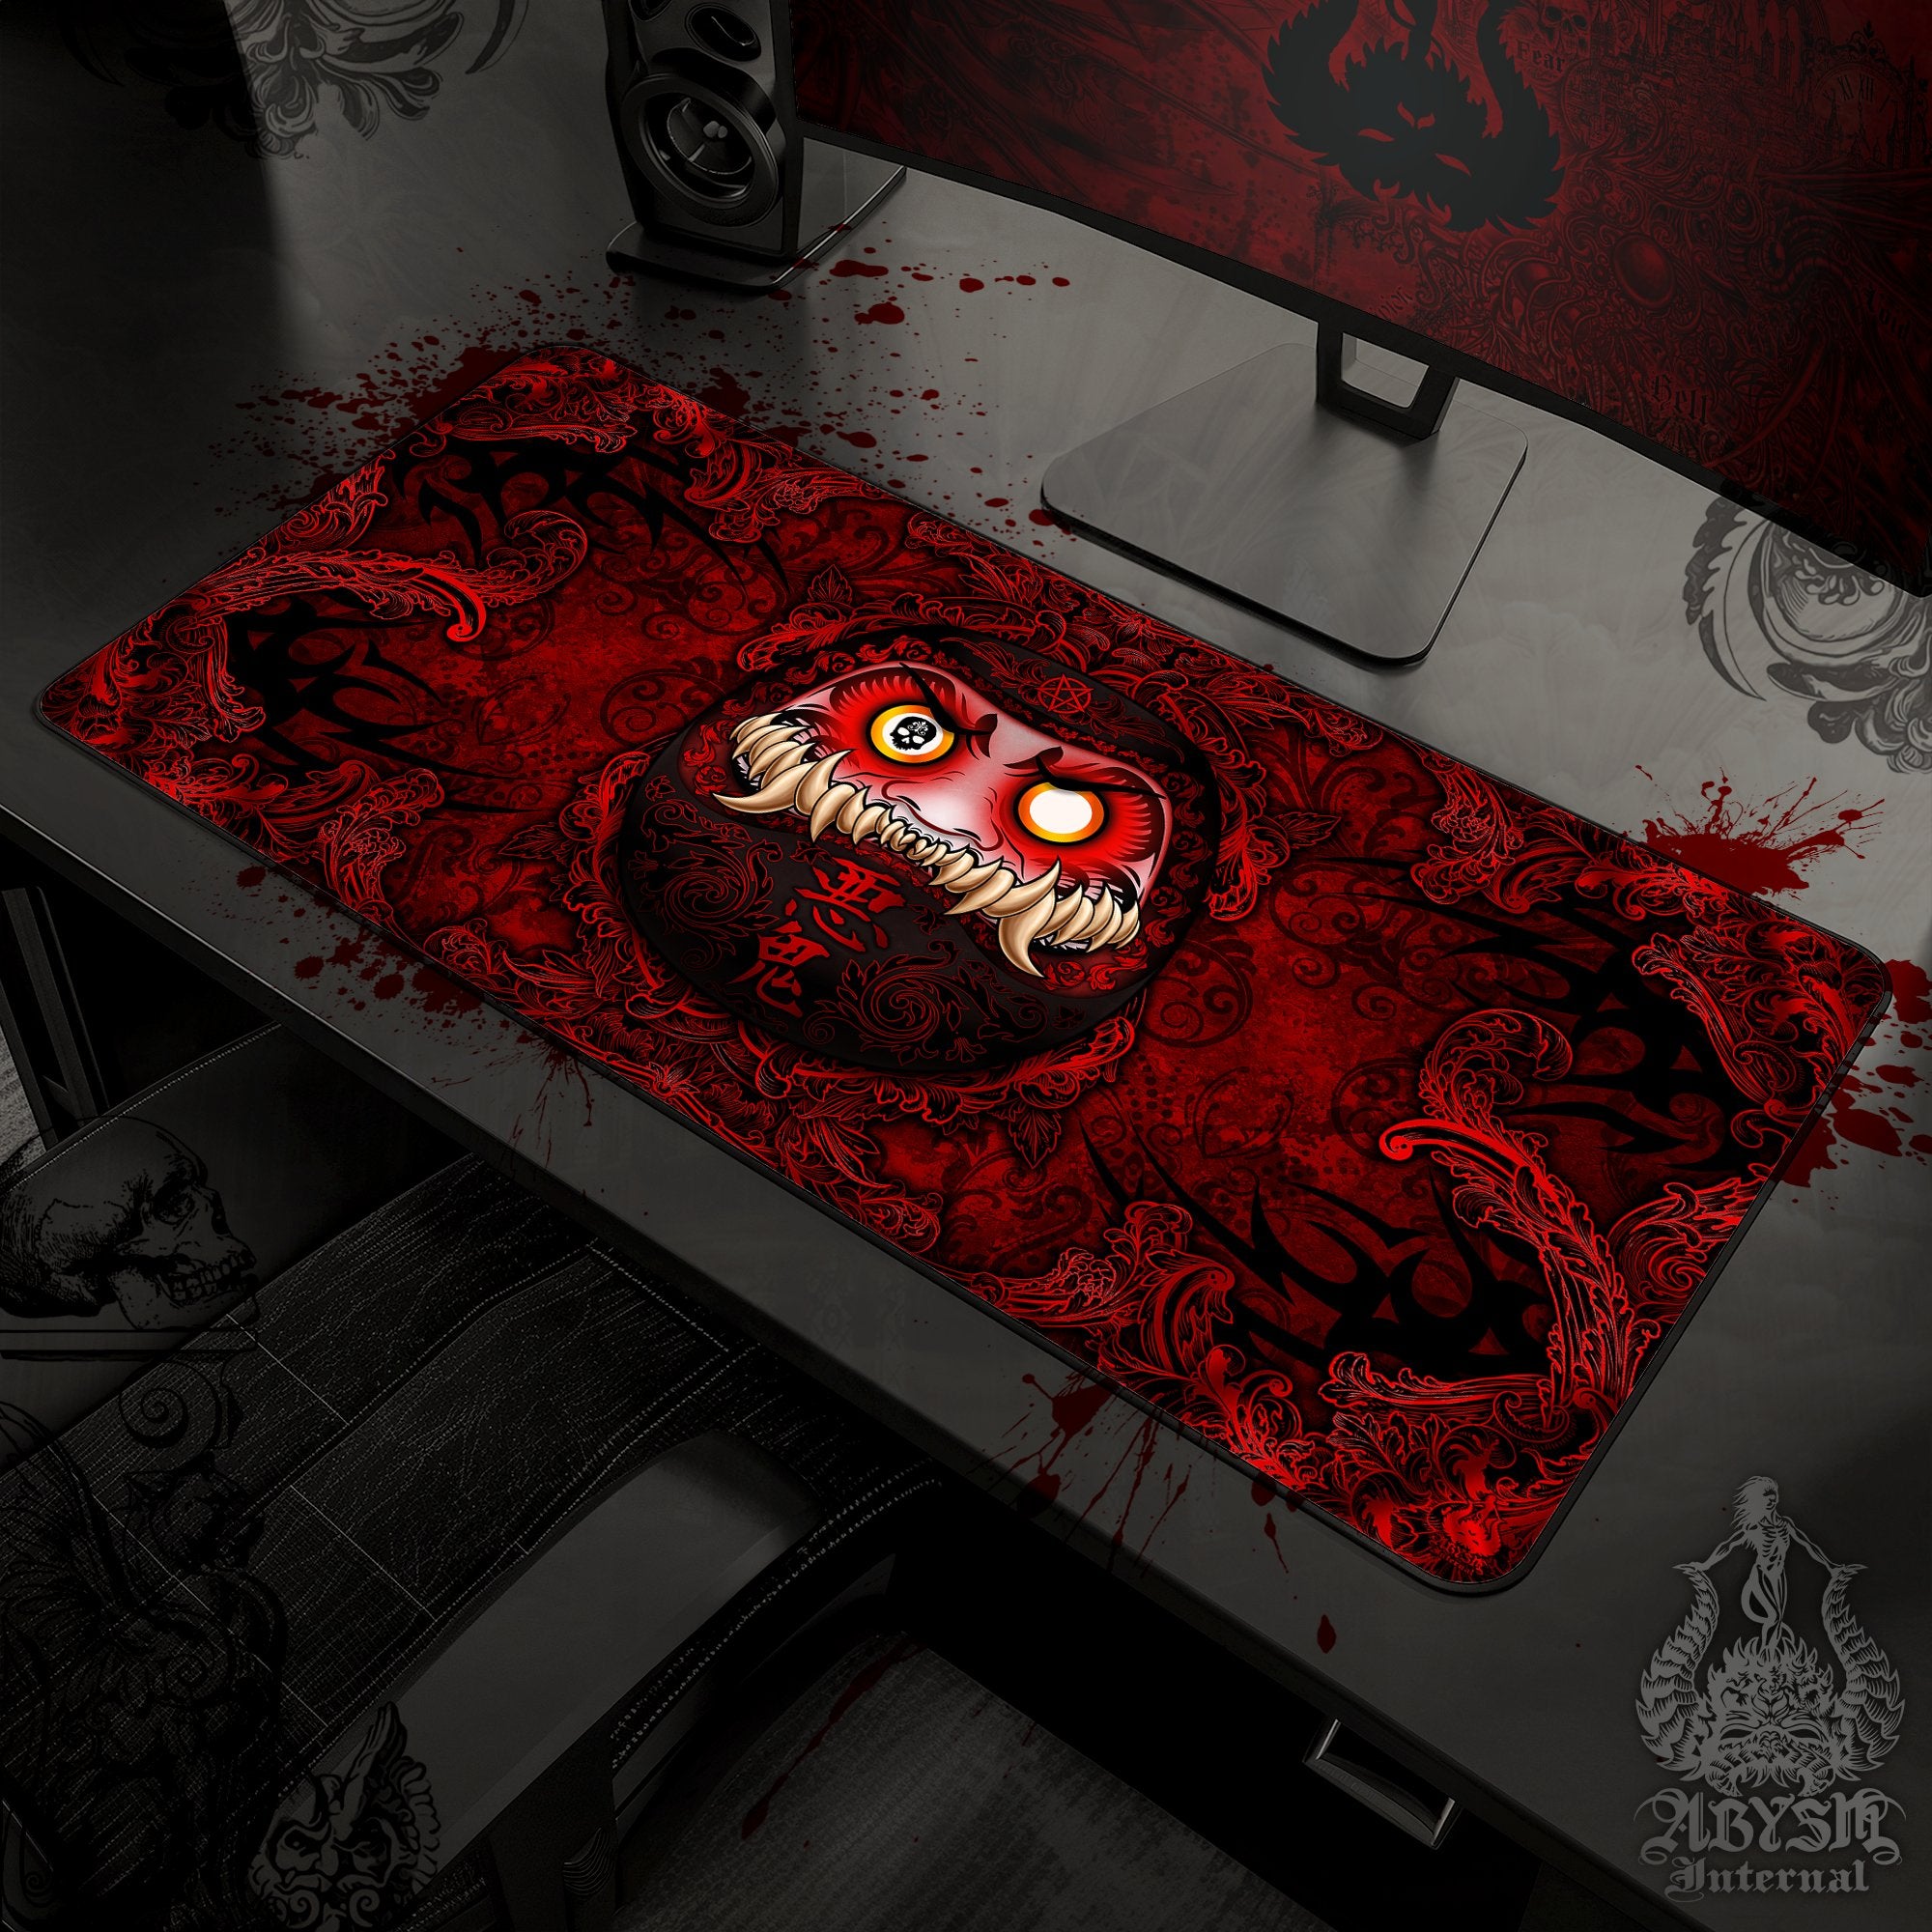 Youkai Desk Mat, Demon Daruma Gaming Mouse Pad, Bloody Gothic Table Protector Cover, Red Black Workpad, Anime and Manga Art Print - Abysm Internal